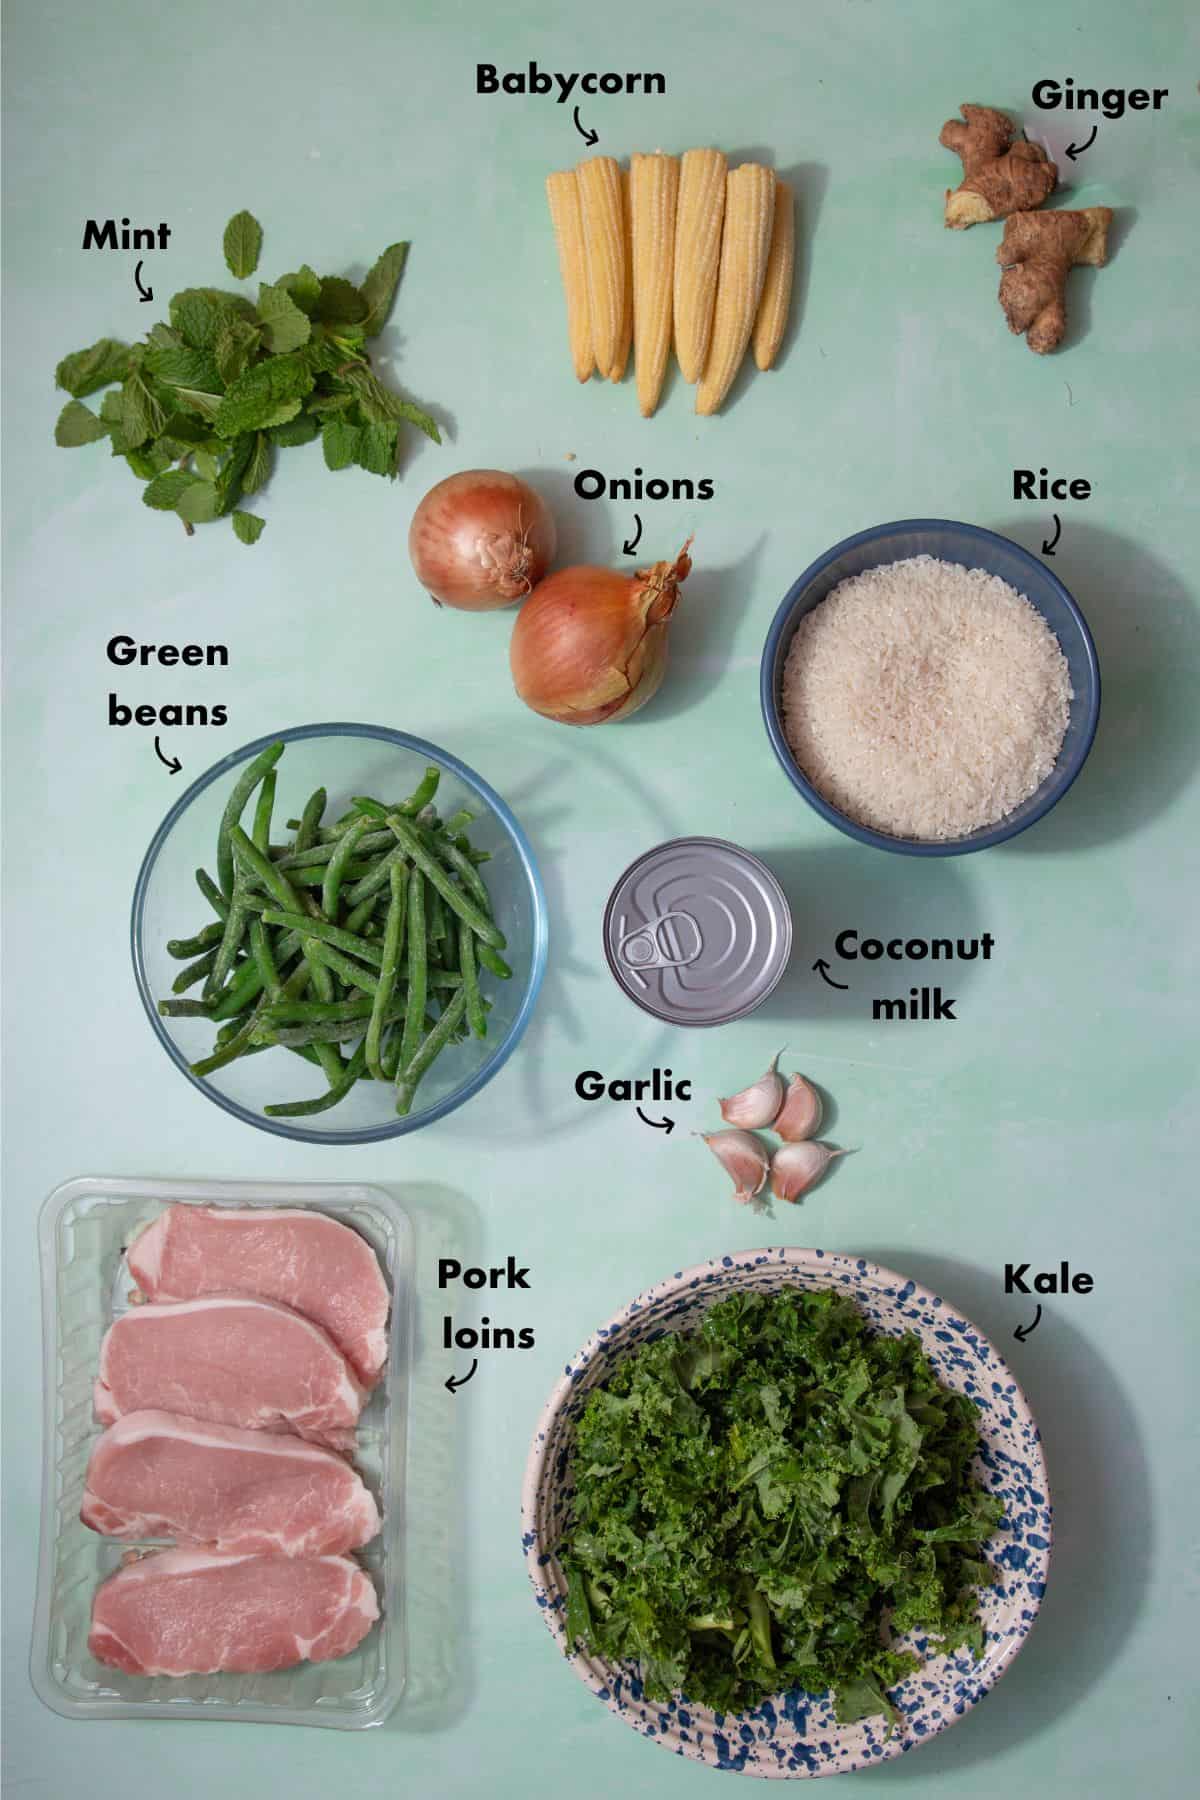 Ingredients to make a pork curry laid out on a pale blue background and labelled.